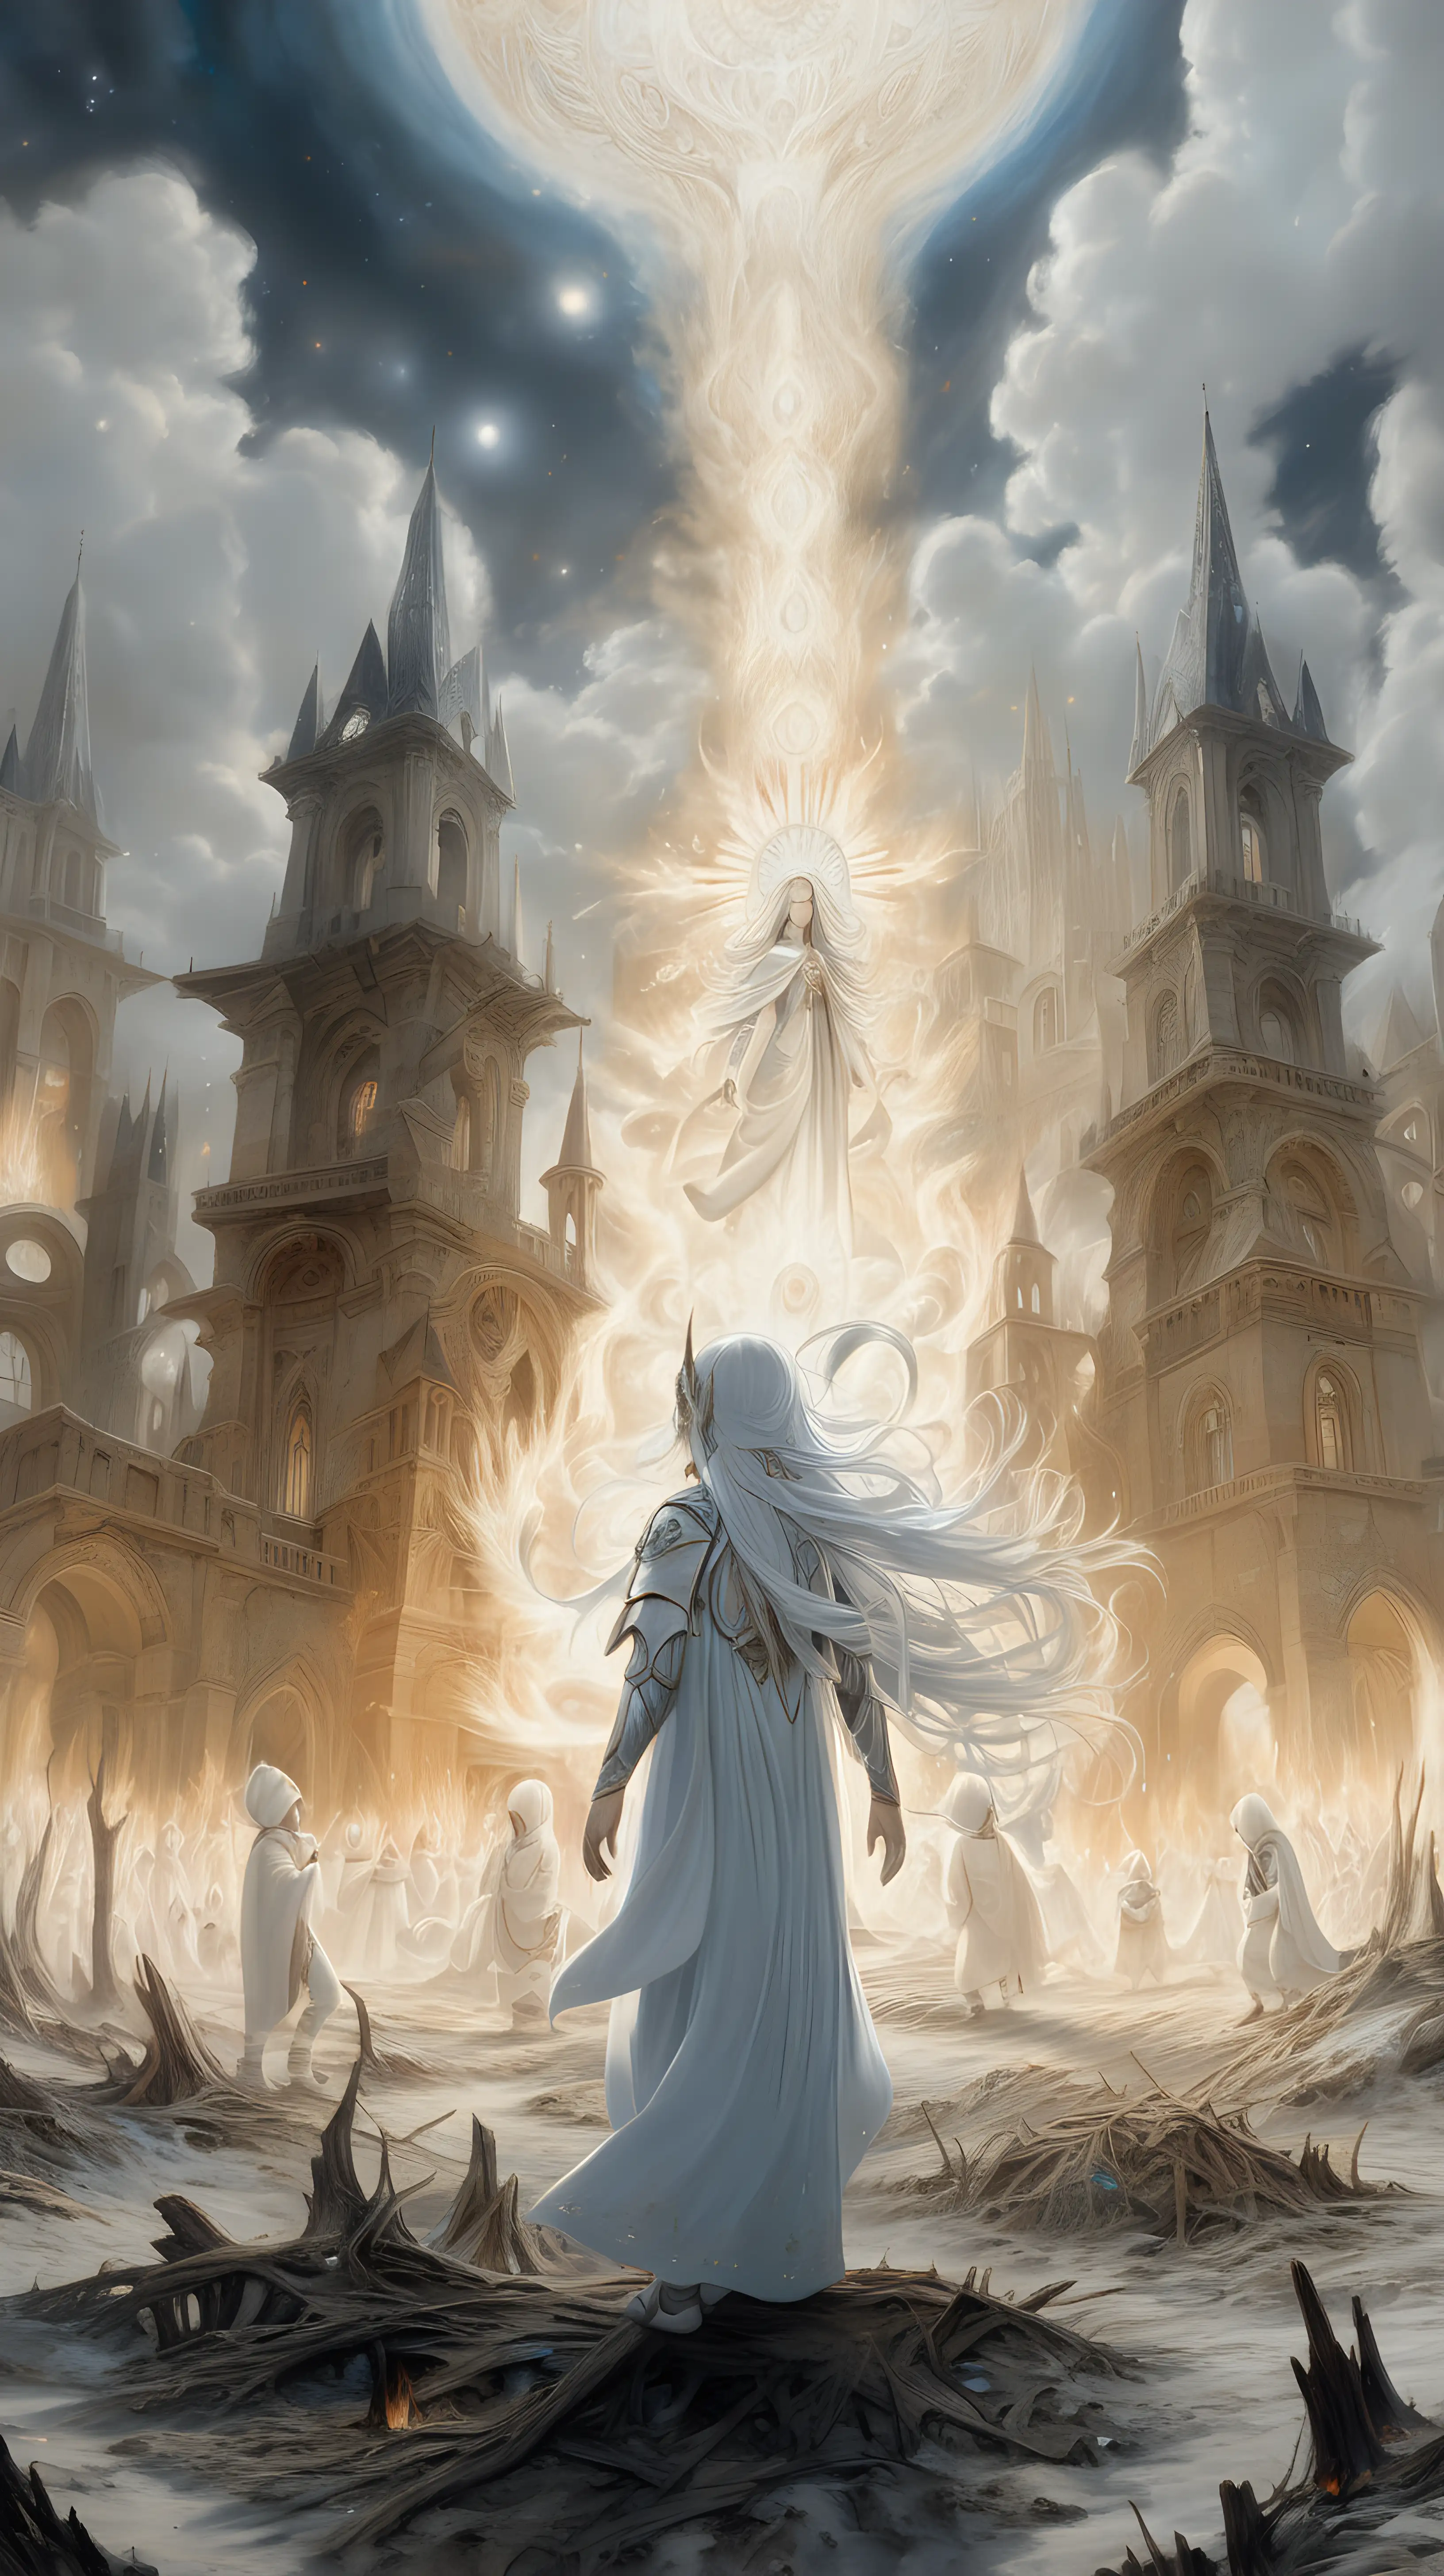 Celestial being, standing in the middle of a burned village, surrounded by white aberrations of spirits, 